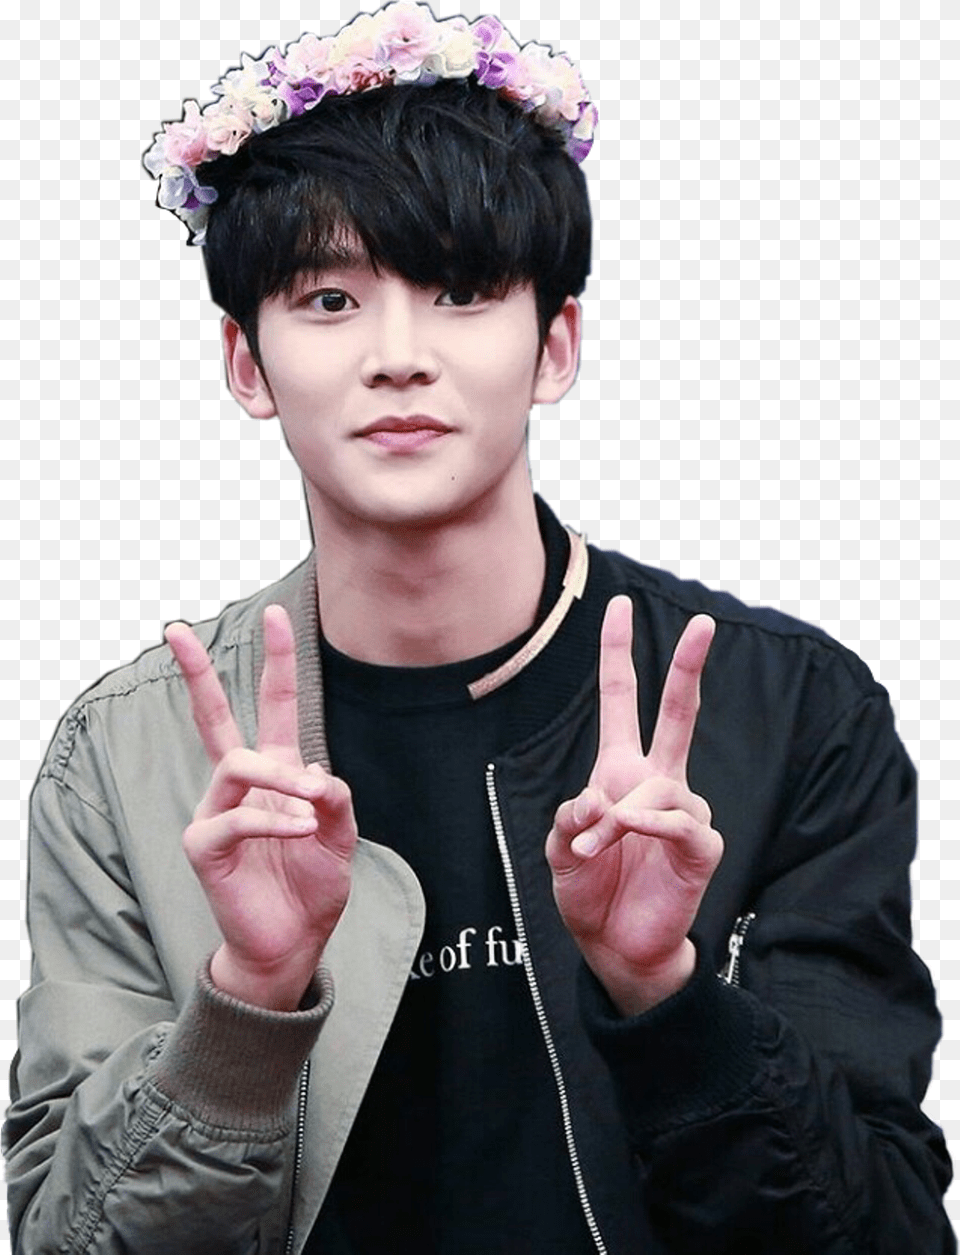 Sf9rowoon Rowoon Aesthetic Cute Flowercrown Peace Girl, Black Hair, Portrait, Photography, Person Png